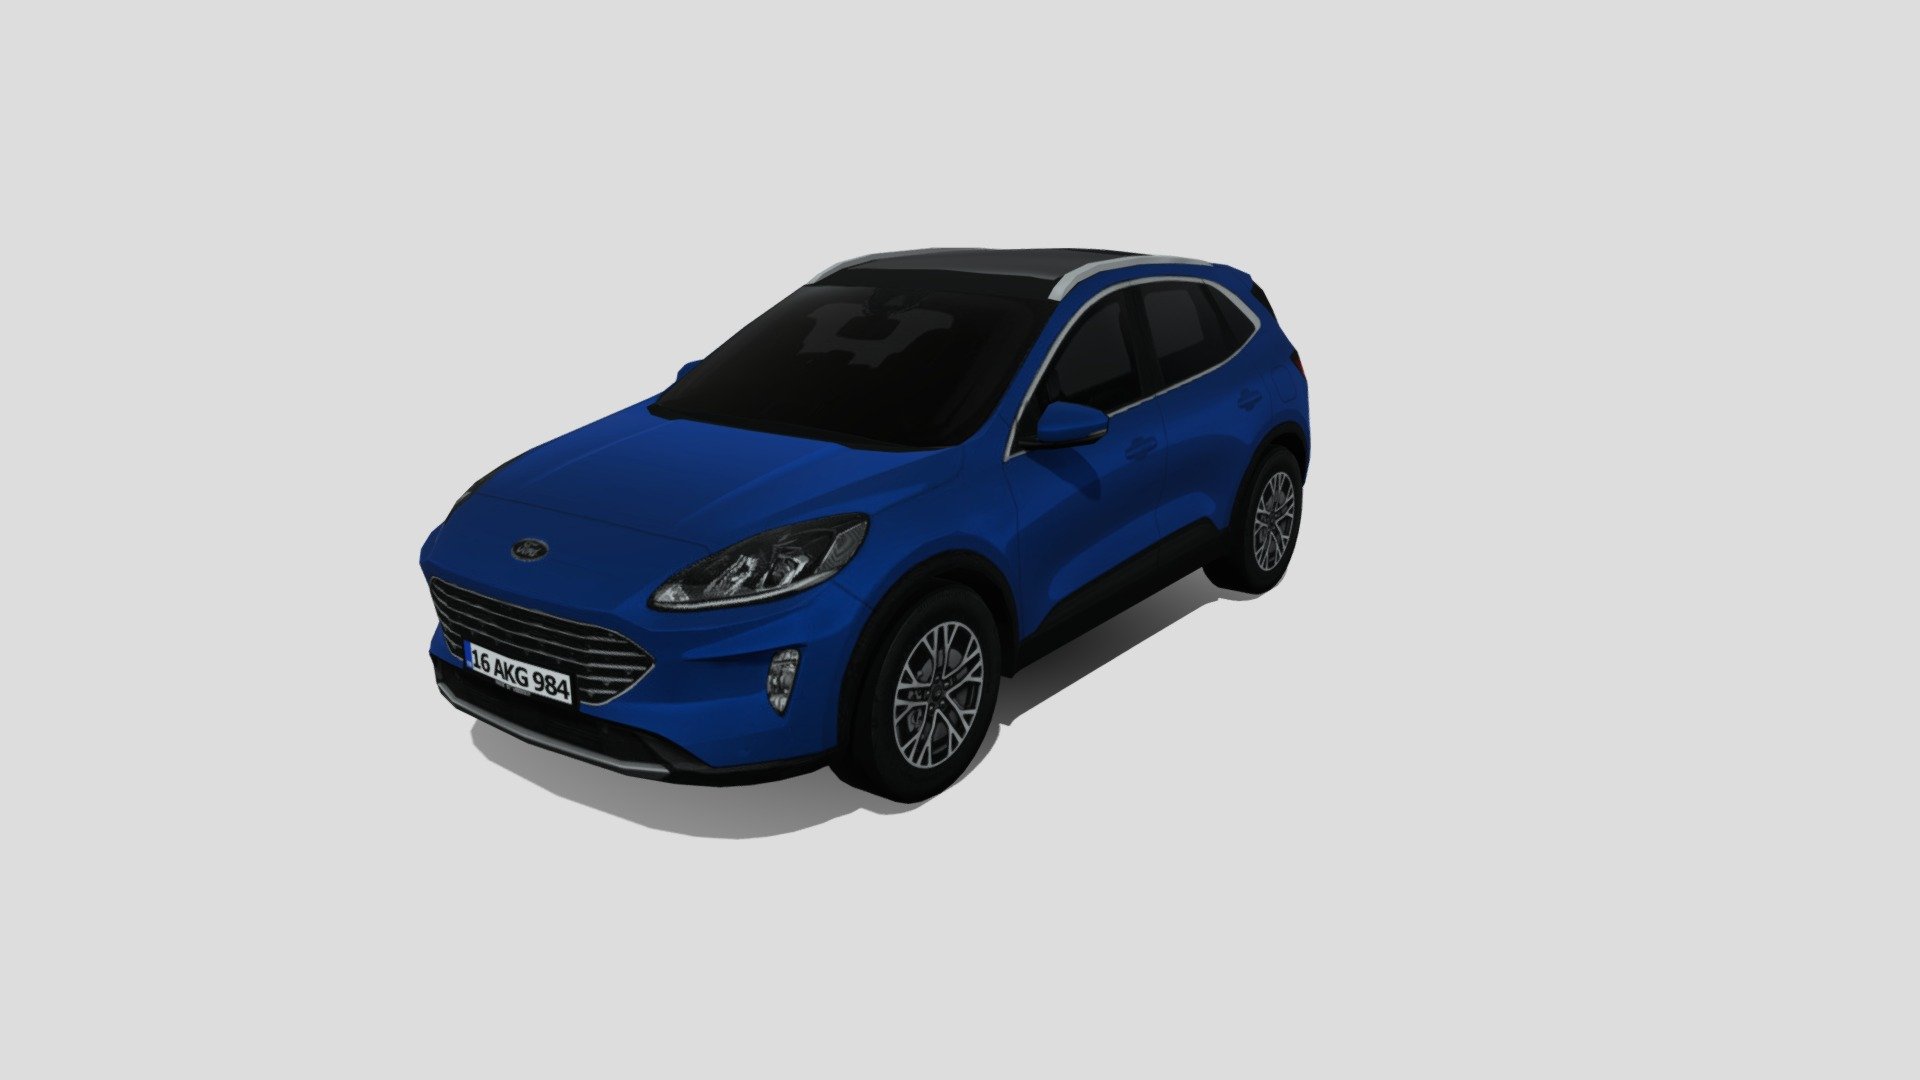 2020 Ford Kuga by VeesGuy

Tris: 3516
Texture: 1024x1024 - 2020 Ford Kuga - 3D model by VeesGuy 3d model